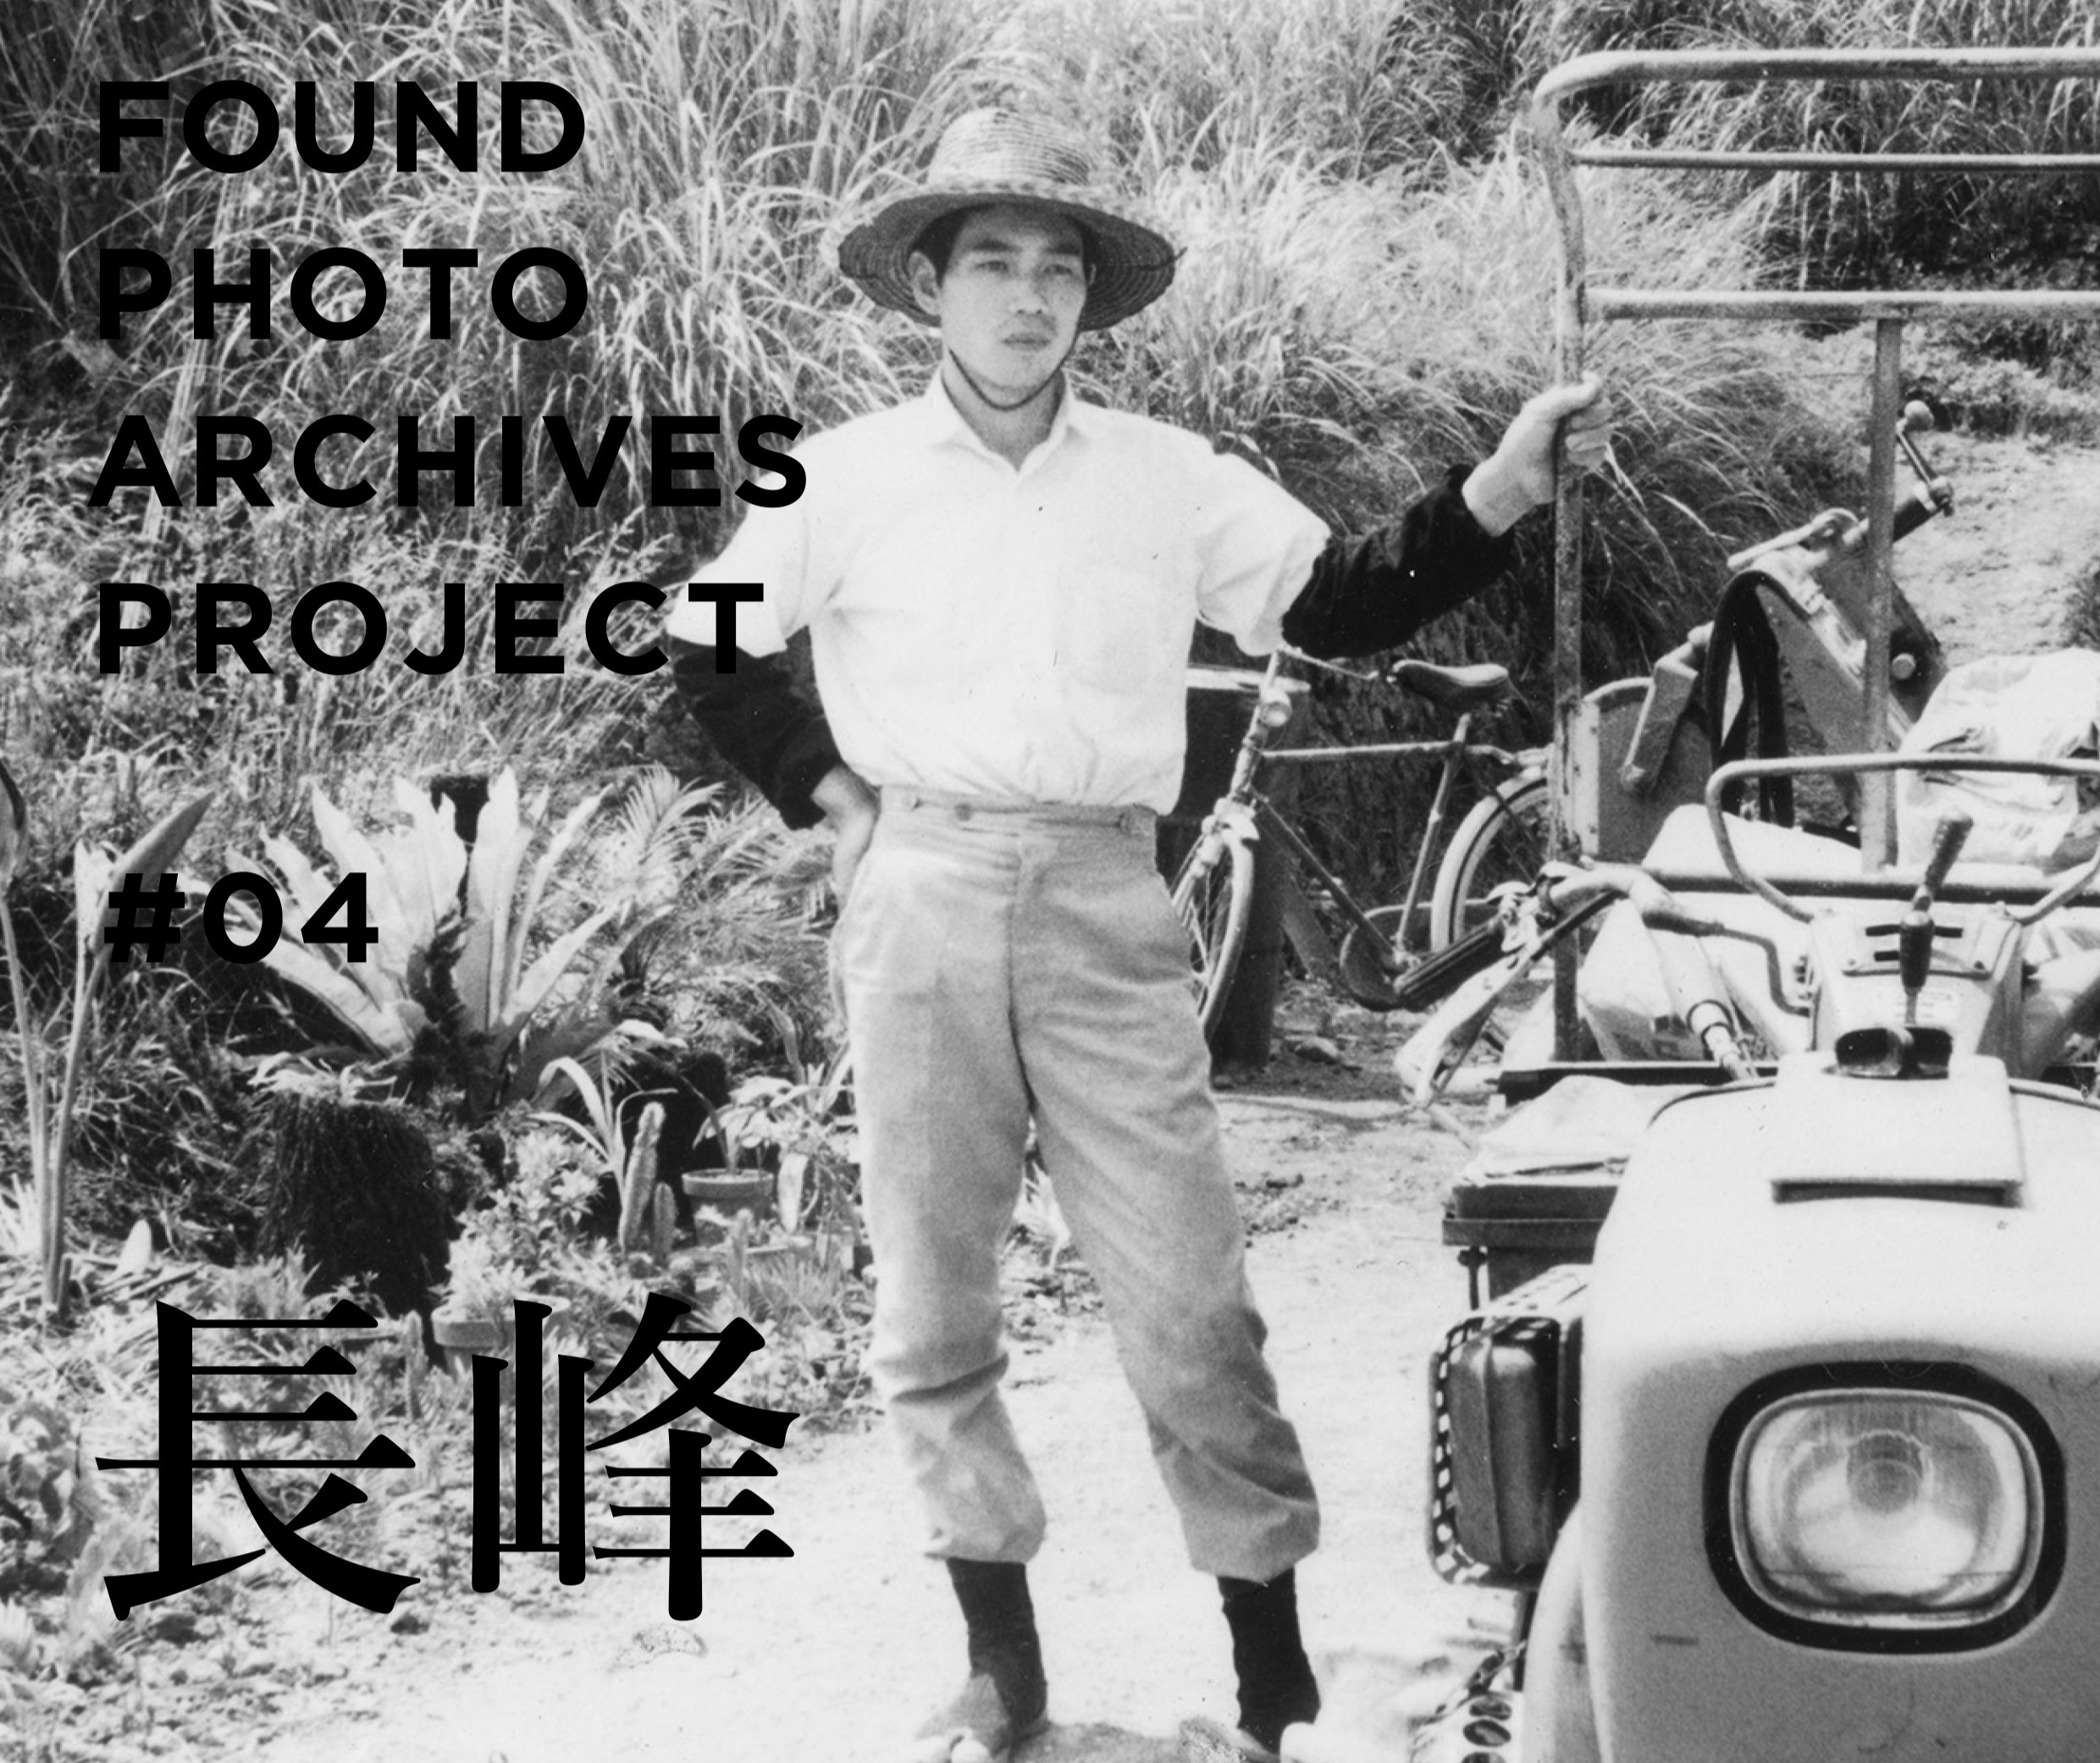 FOUND PHOTO ARCHIVES PROJECT　長峰